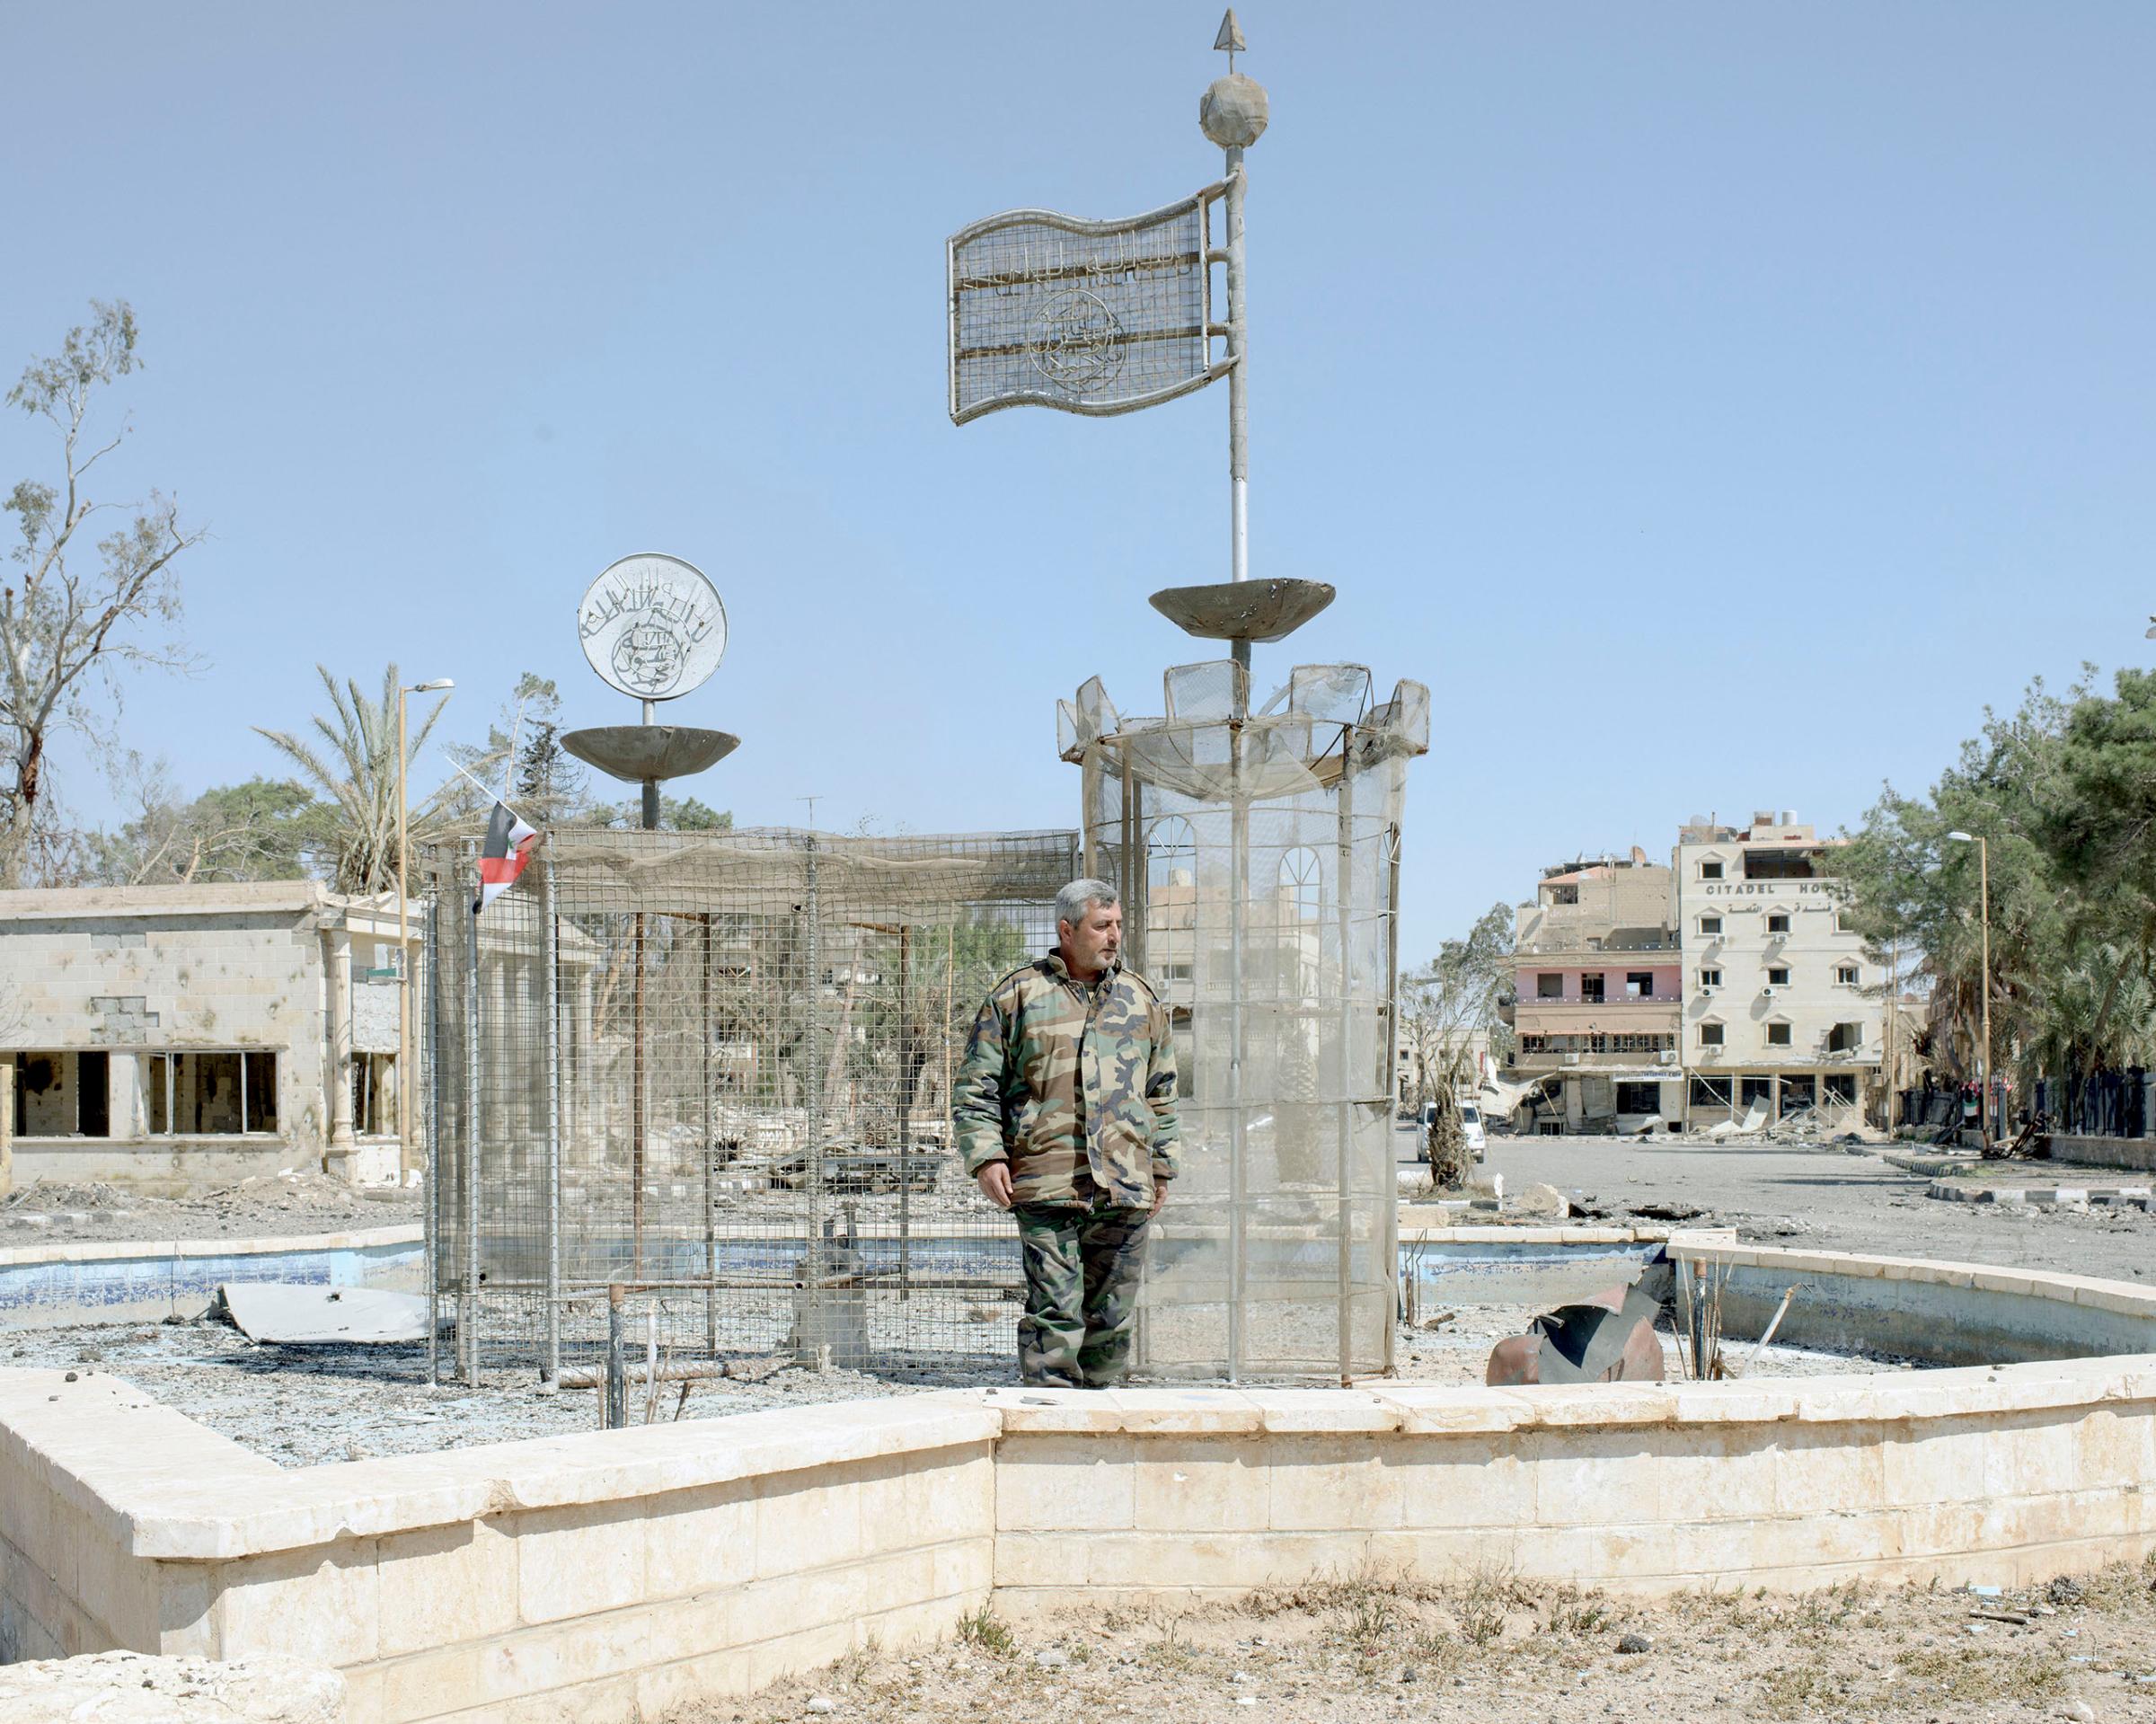 Syrian Army Colonel Samir Ibrahim stands in front of an iron ISIS structure erected in a fountain of the main square in Palmyra, Syria, April 1, 2016. This is where ISIS decapitated Khaled al-Asaad, the octogenarian who headed Palmyra’s antiquities department for decades, stringing up his body to terrify local people.